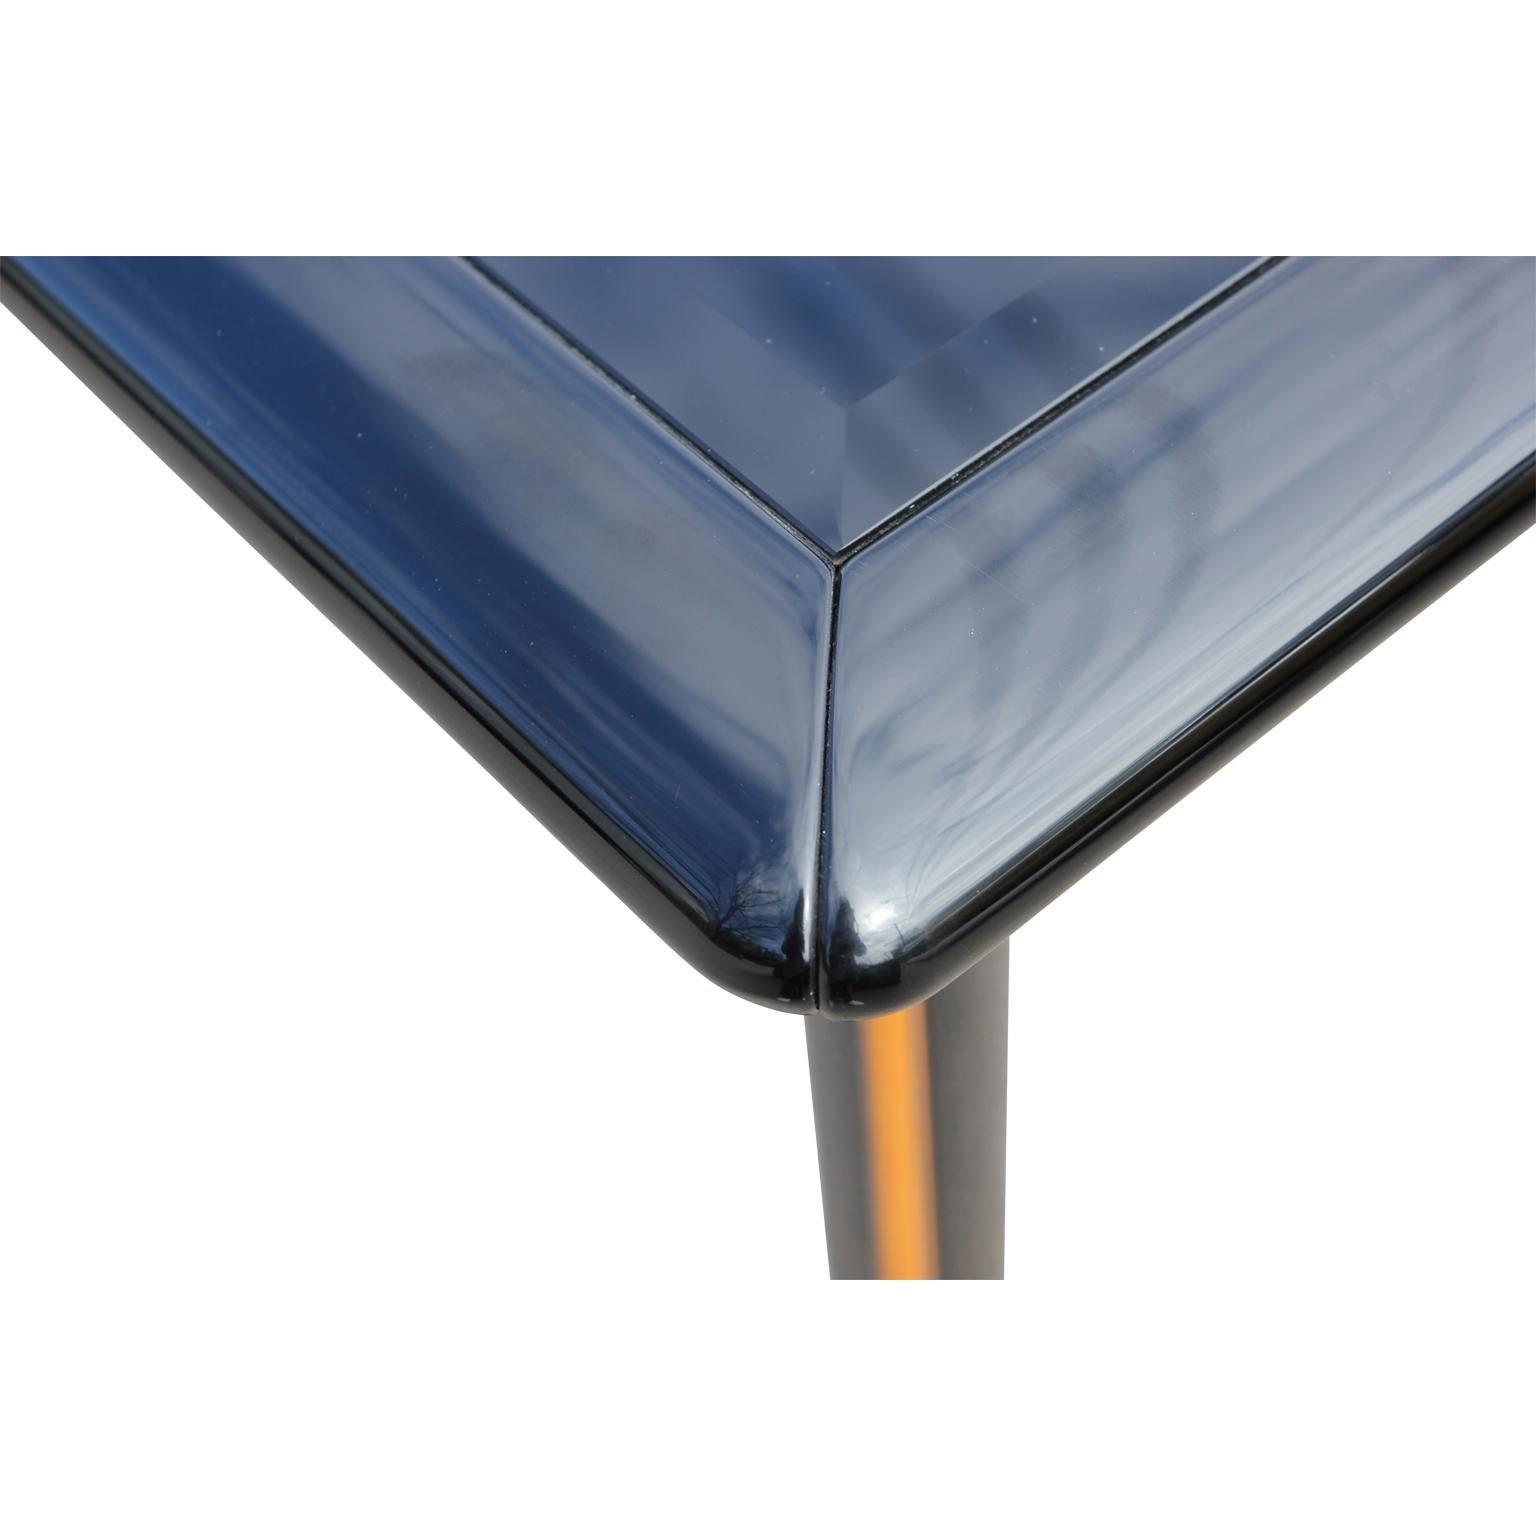 Late 20th Century Roche Bobois for Pierre Cardin Italian High Gloss Black Lacquer Dining Table